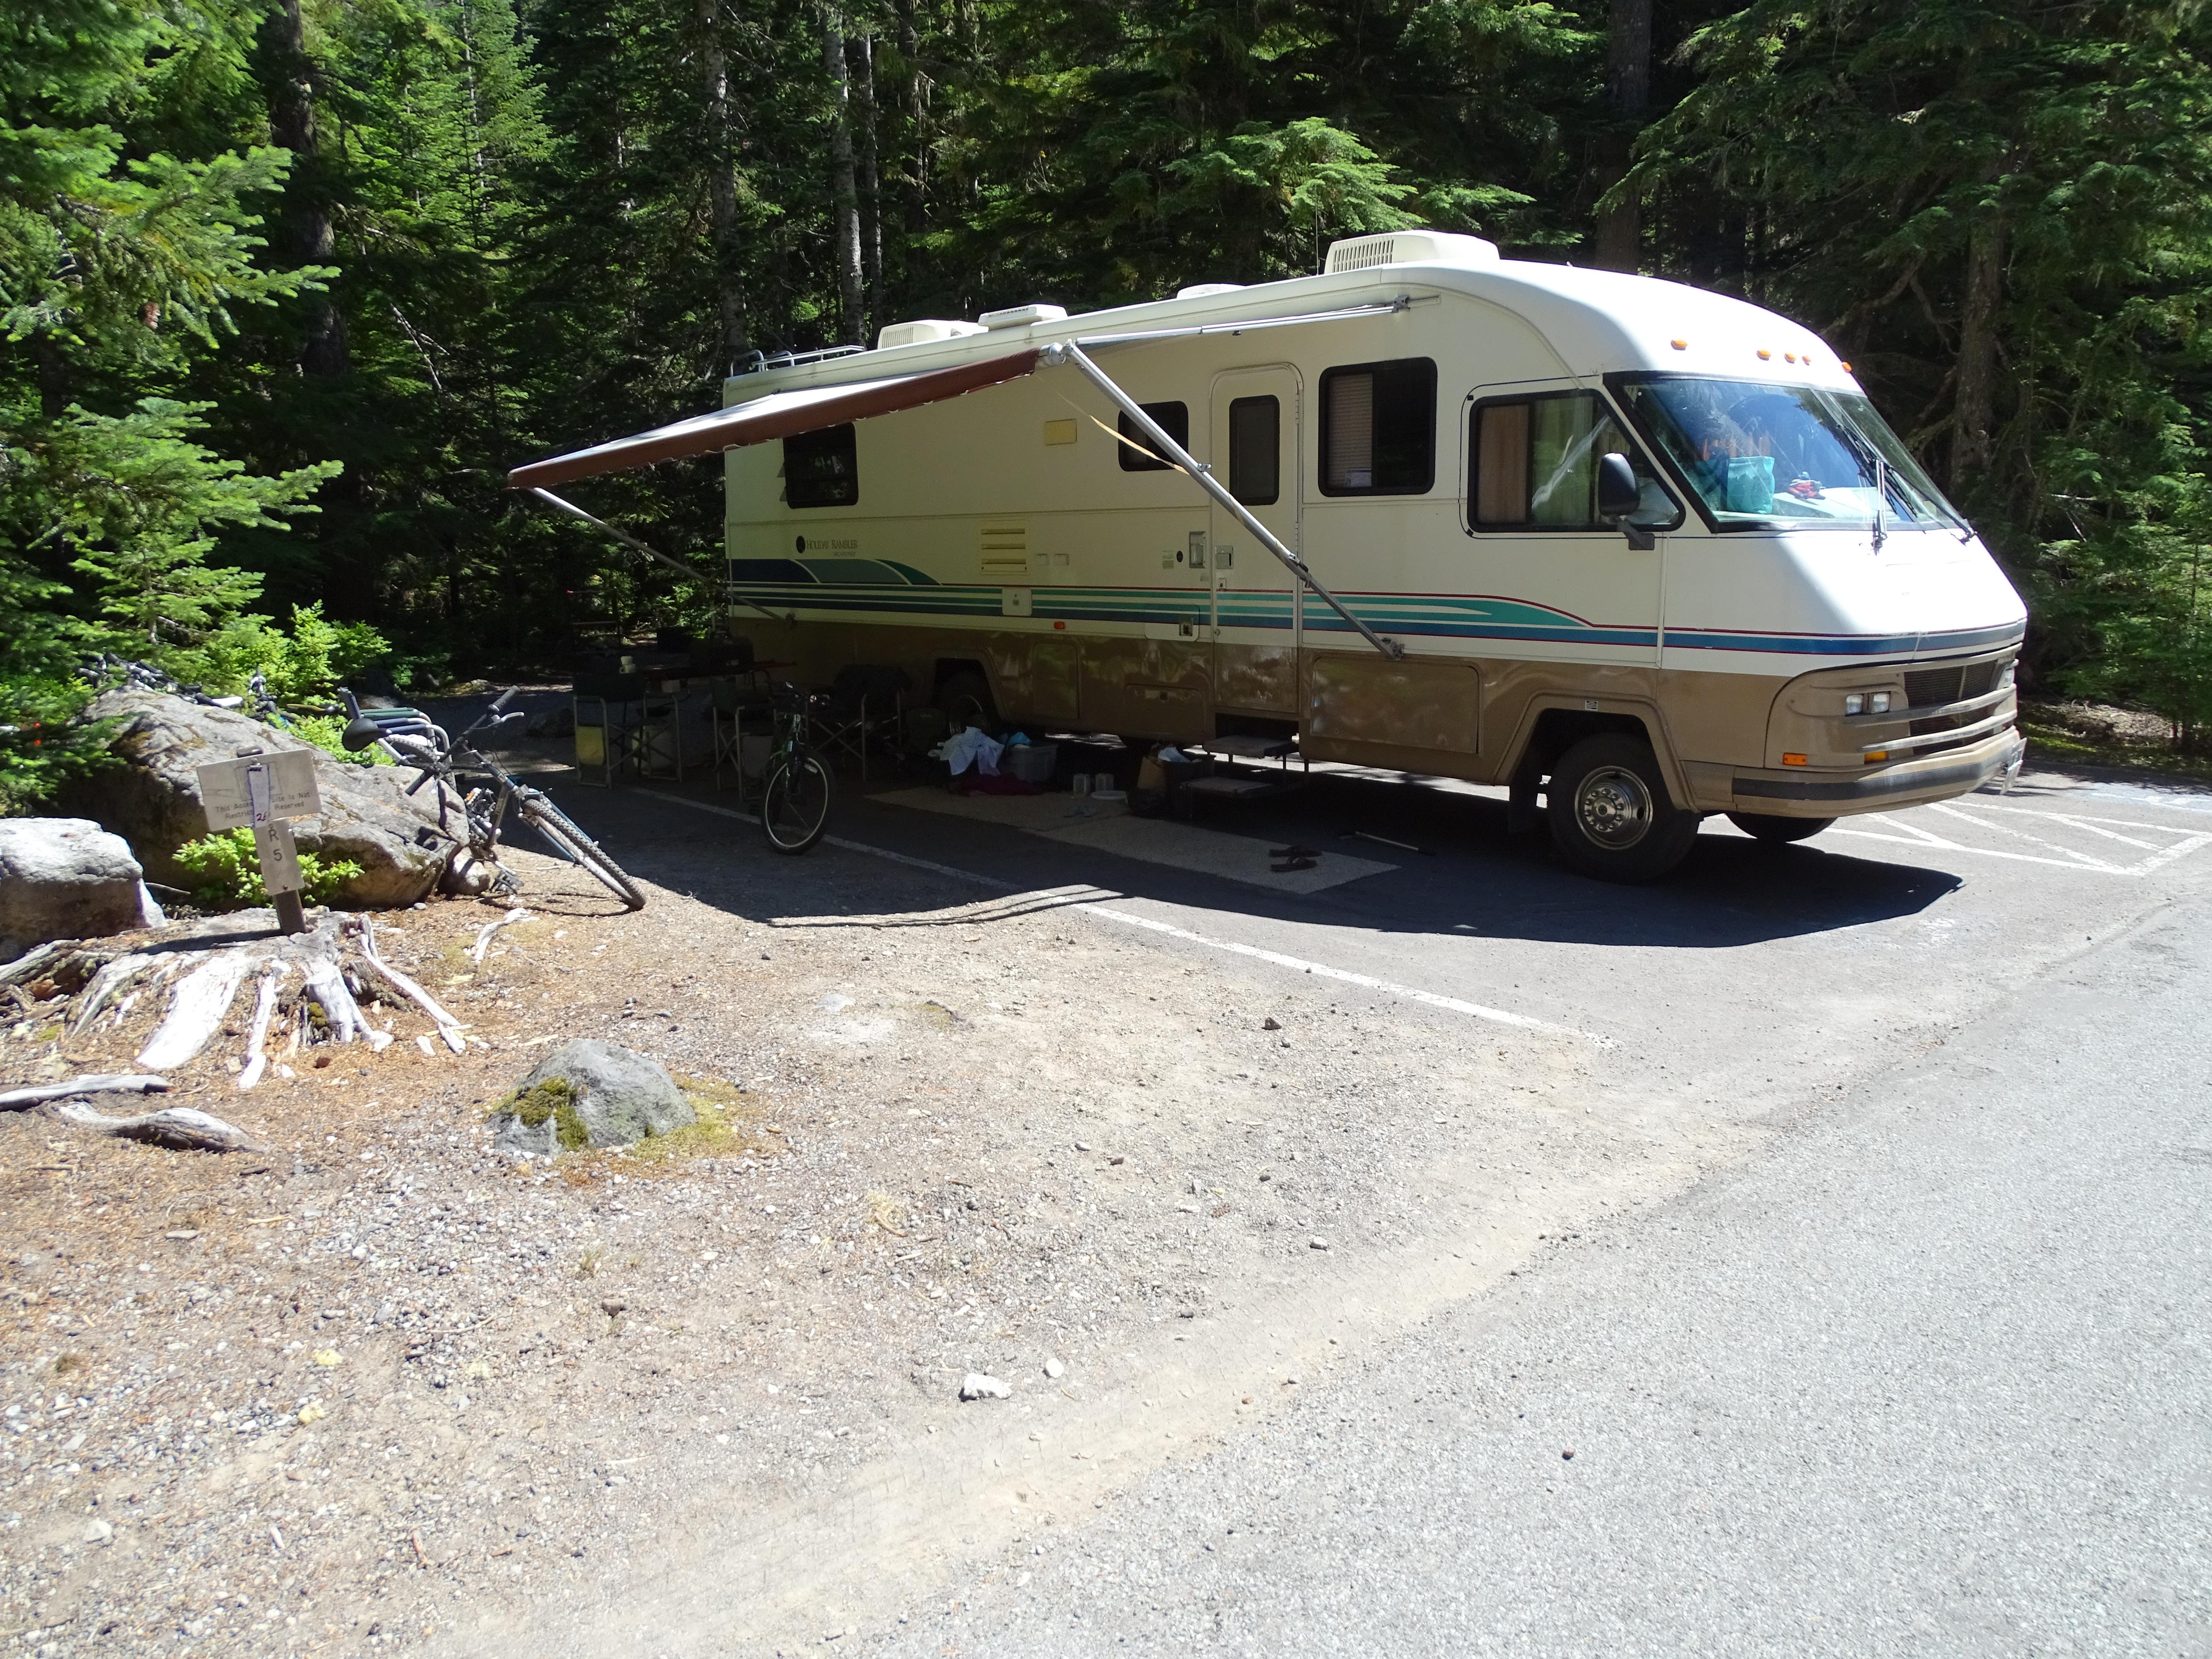 A large white RV in front of thick woods